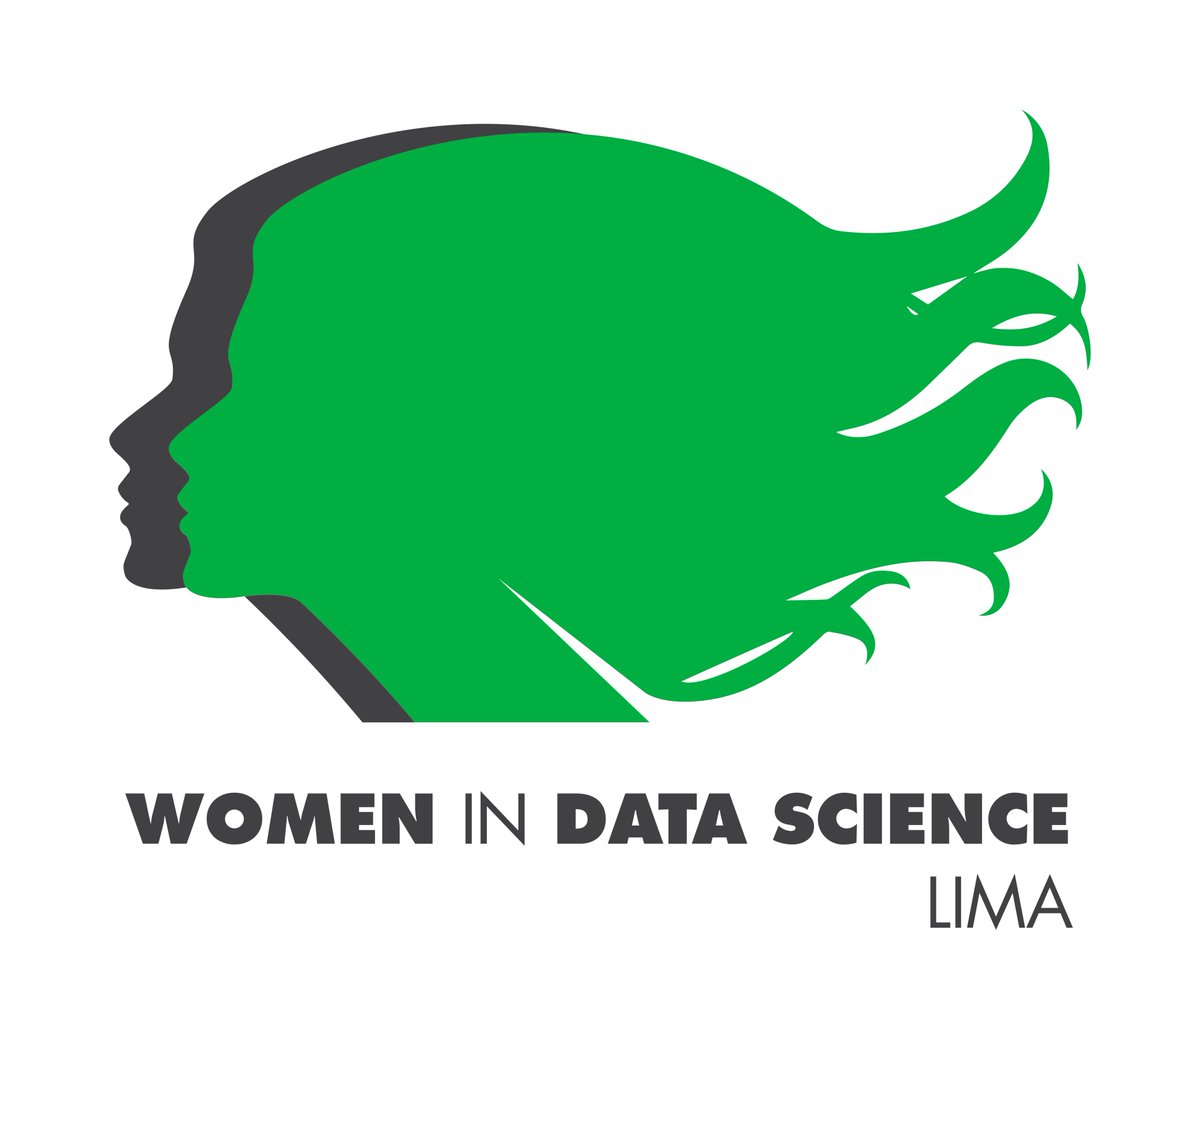 Get Inspired at the WiDS Lima regional event on Mar 9th, where incredible women in data science share challenges, opportunities and good practices. Organized by #WiDS2023 ambassadors Lucia Haro Gonzales & Alejandra Burgos. Register Now: widslima.org